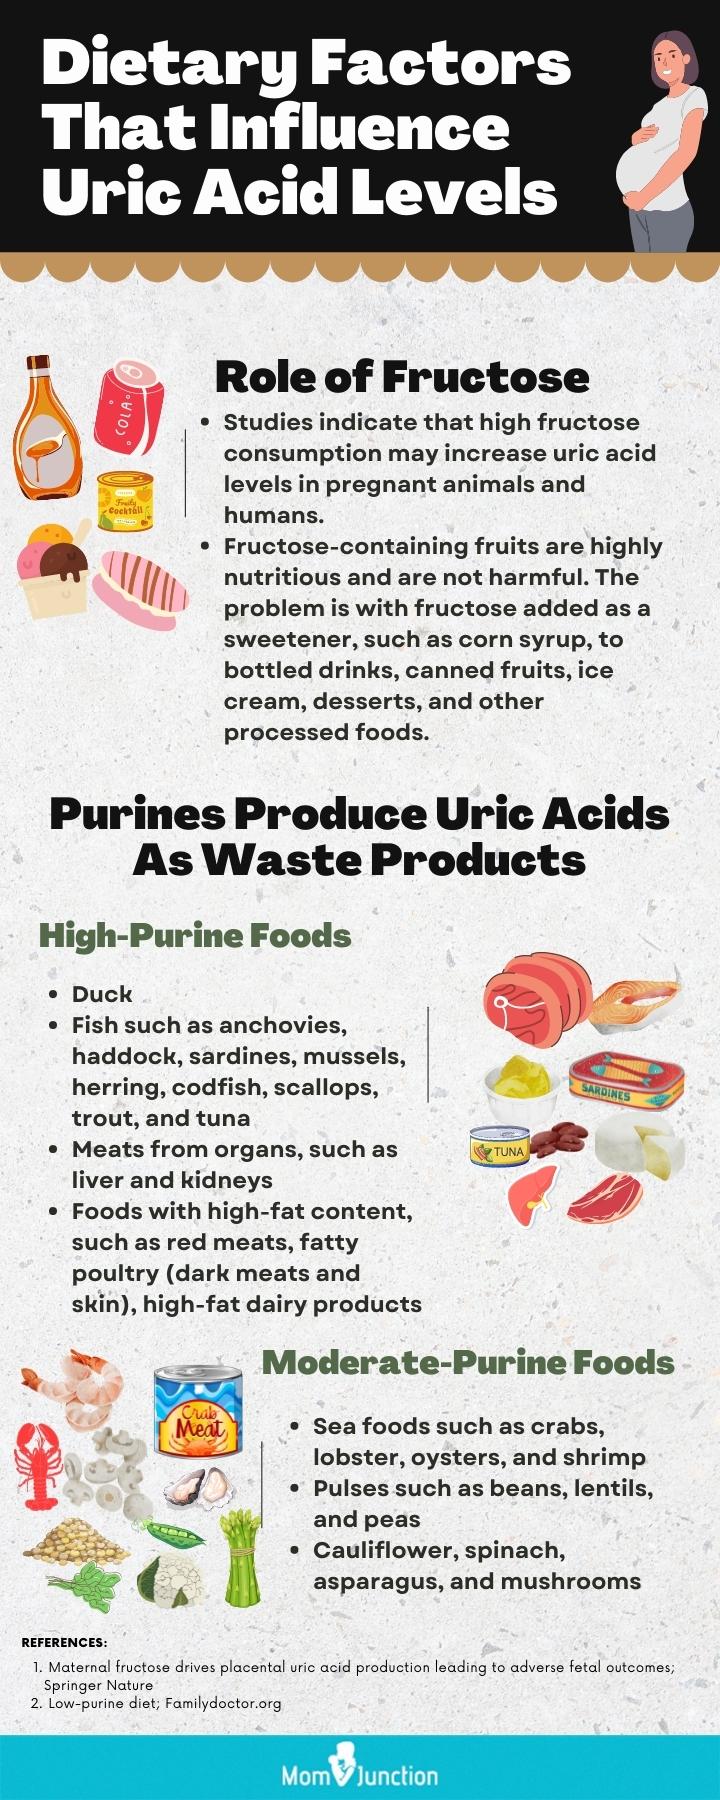 dietary fators that influence uric acid levels(infographic)